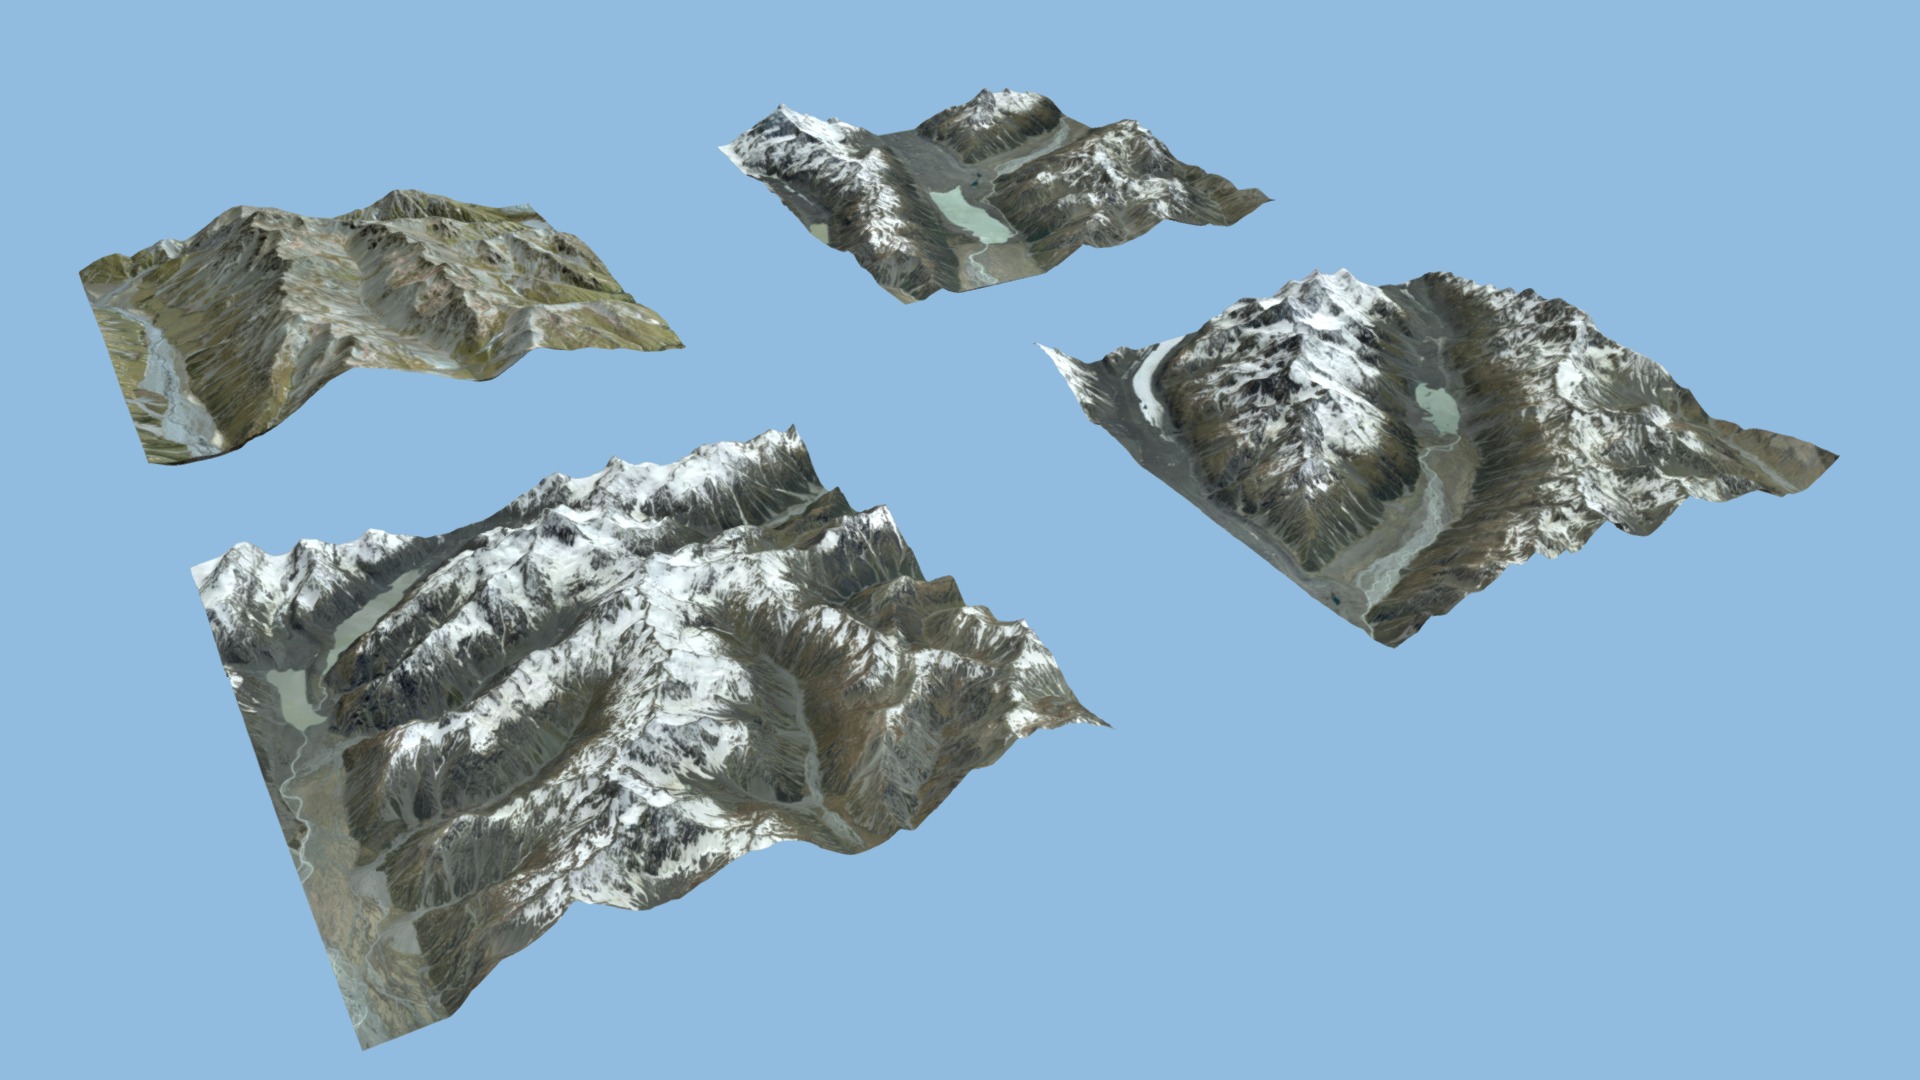 3D model Snow Mountains – South Island New Zealand - This is a 3D model of the Snow Mountains - South Island New Zealand. The 3D model is about a group of birds flying.